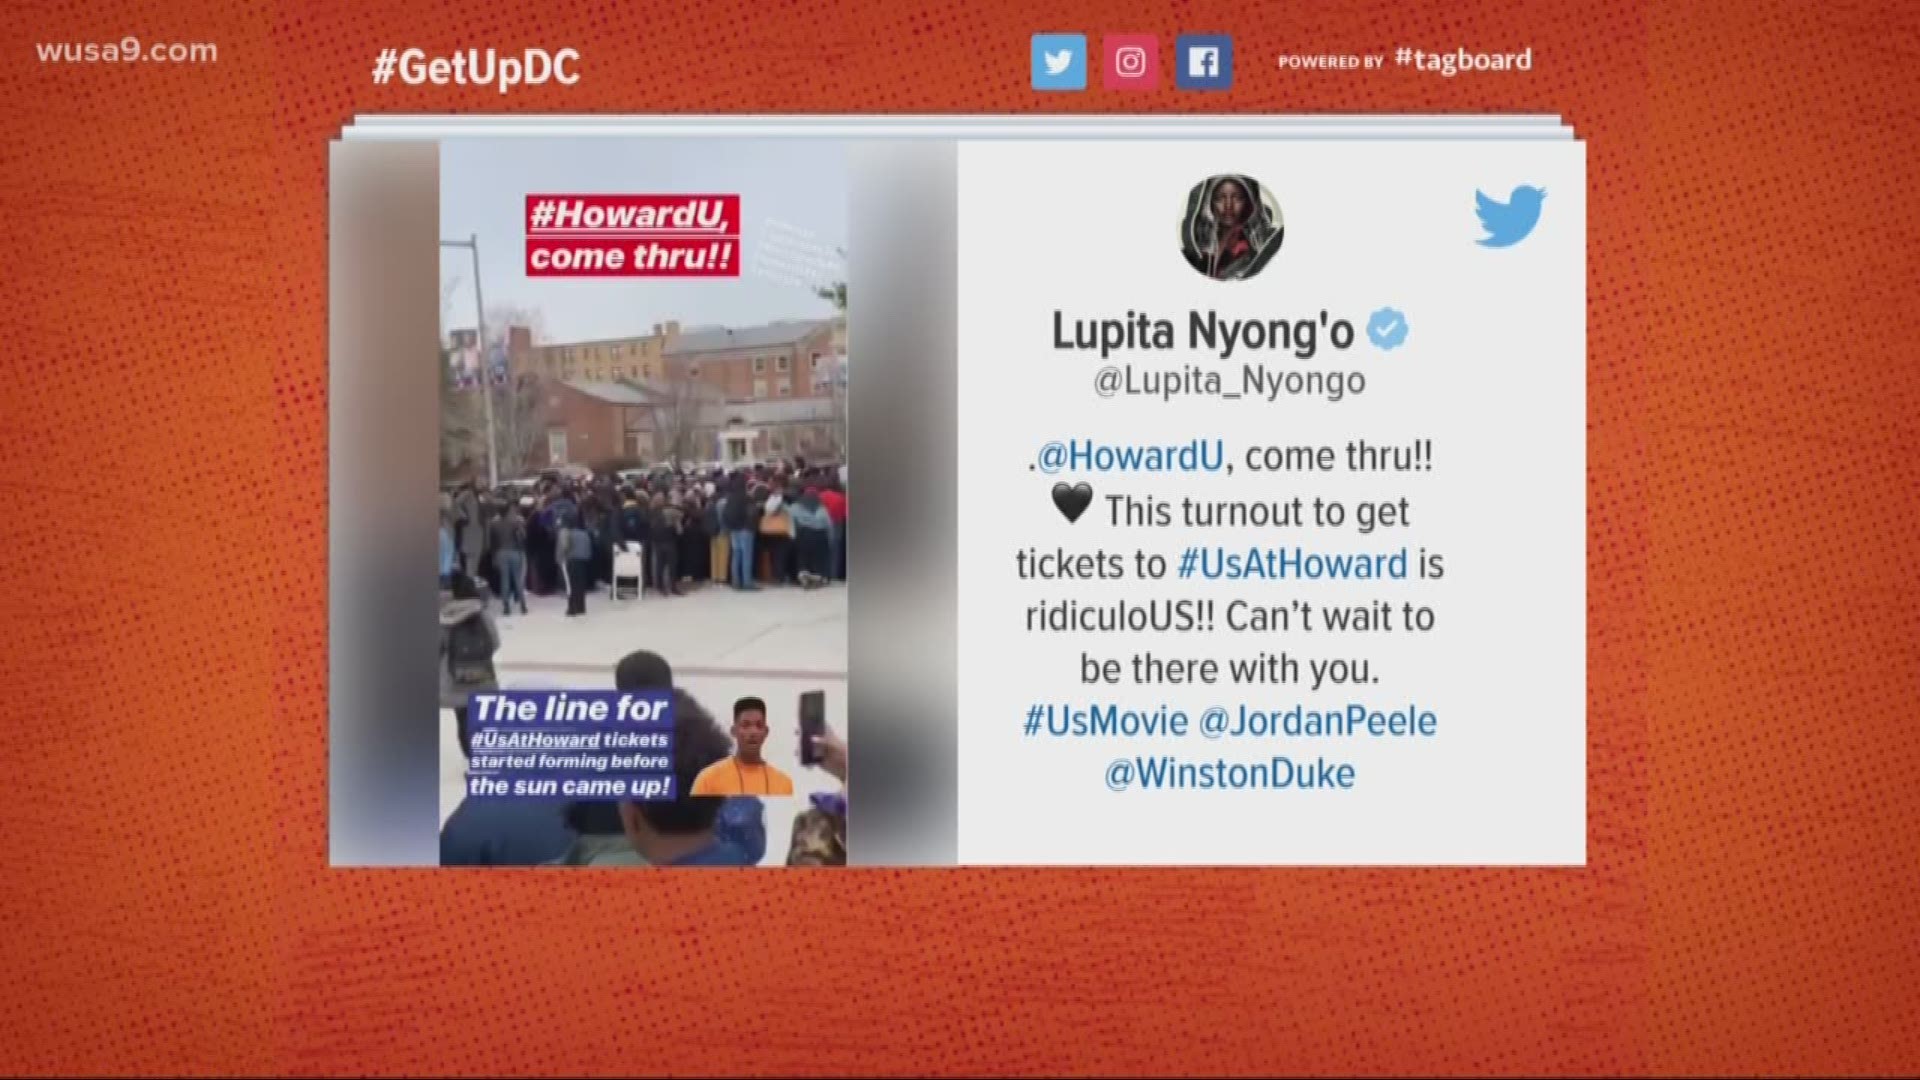 Lupita Nyong'o tweets photo of Howard University students standing in line to get tickets to the screening of Us movie.